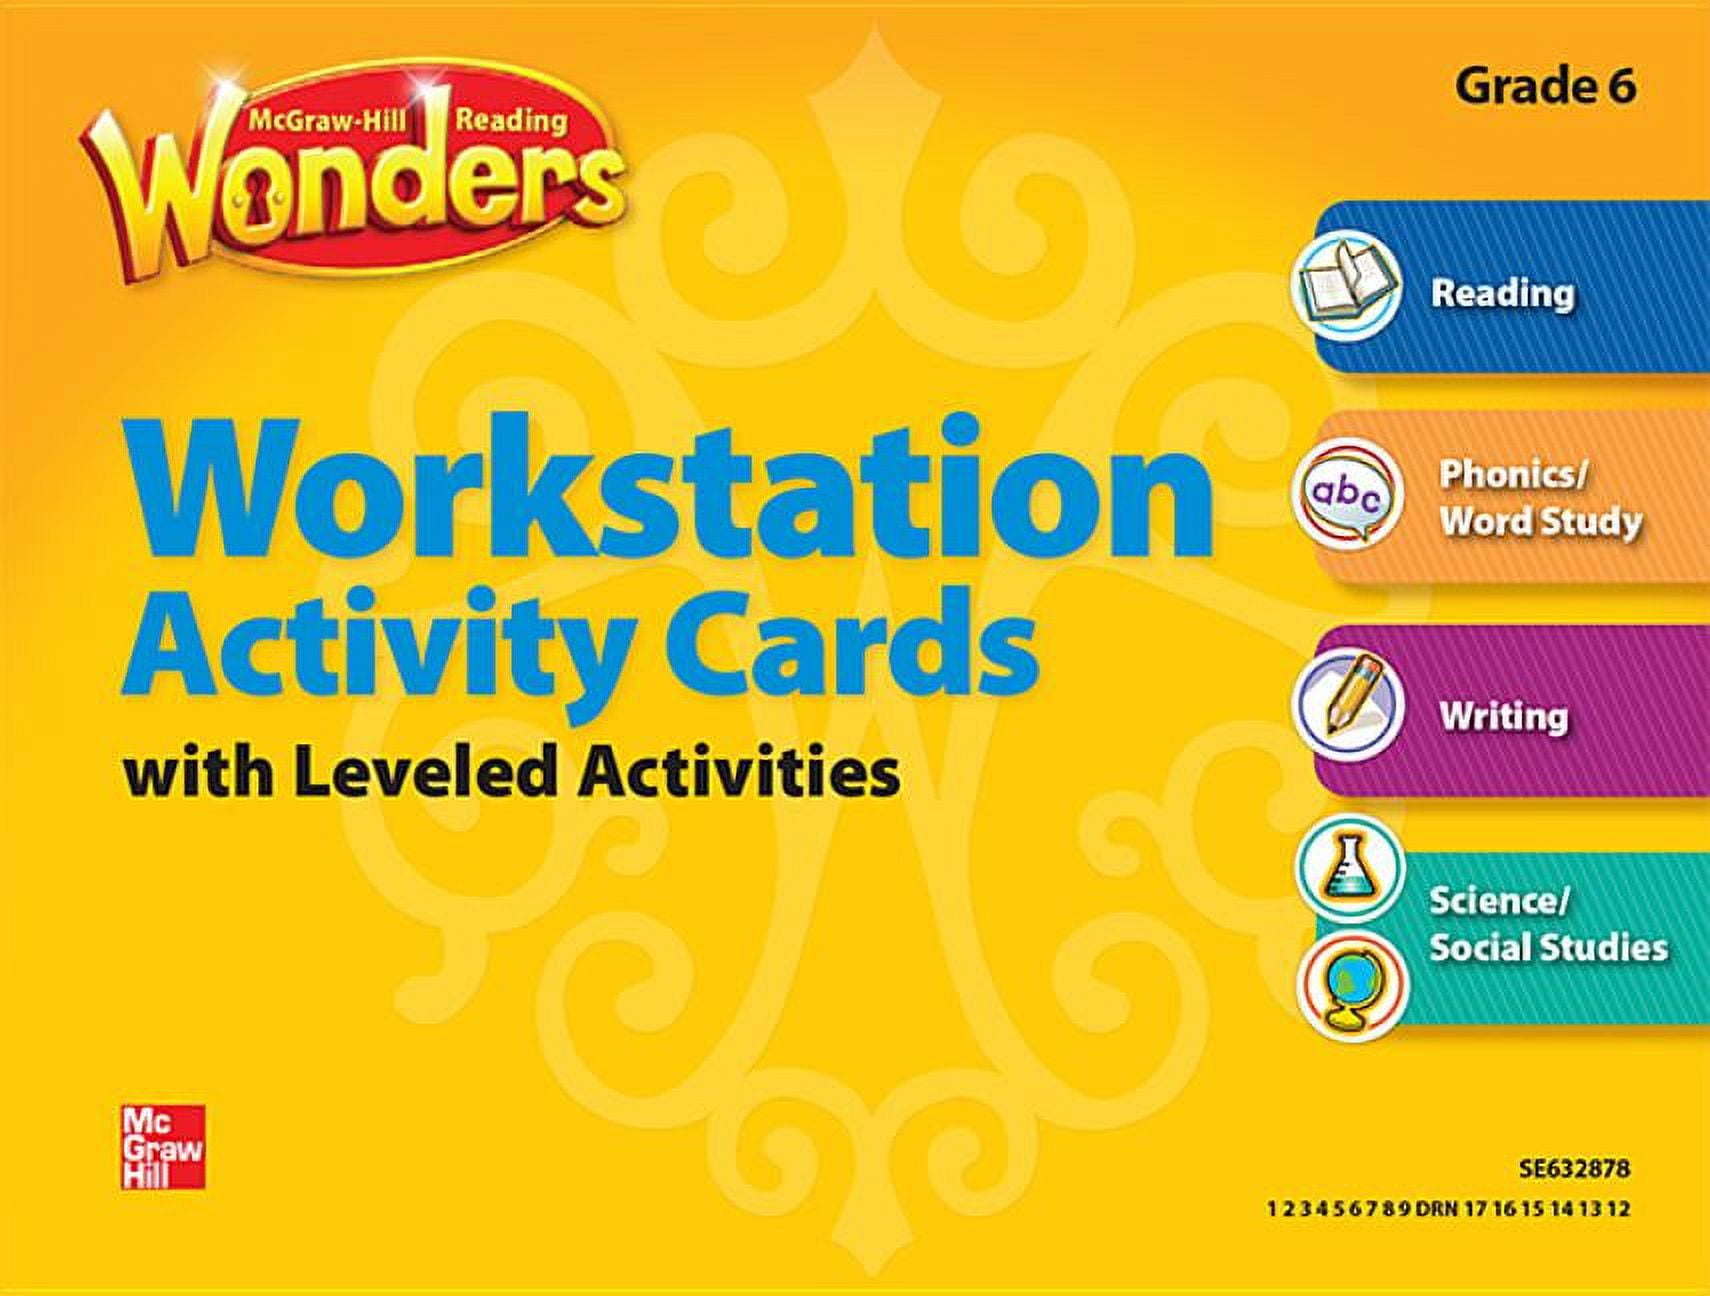 Grade　6,　Reading　Activity　Cards　Wonders,　Workstation　Package